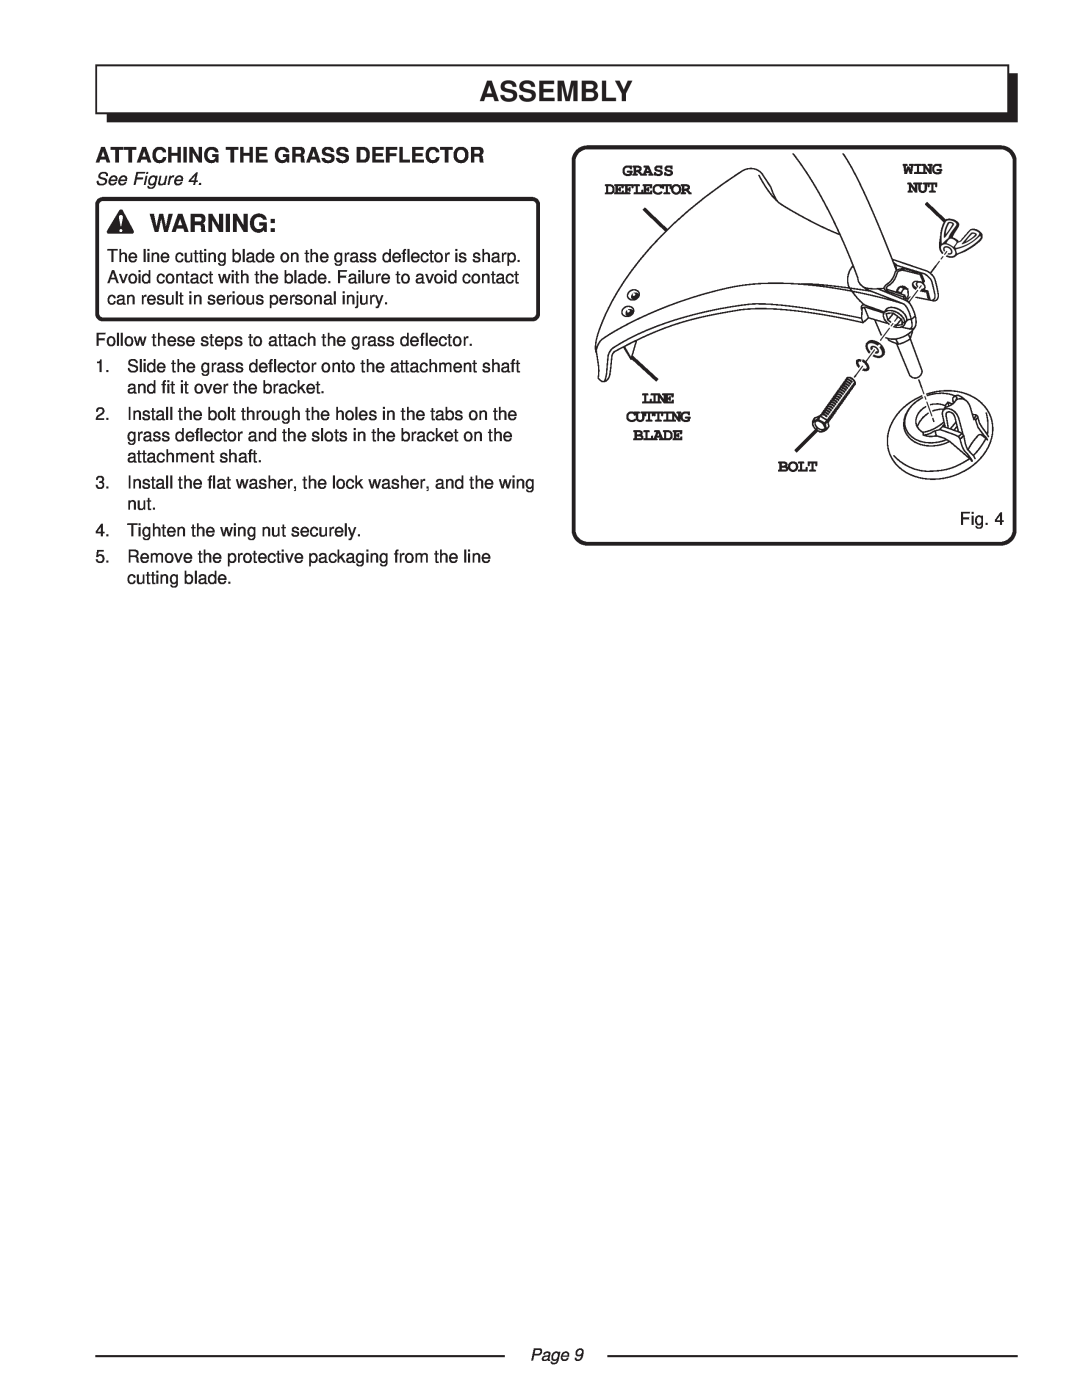 Homelite UT41002 manual Attaching The Grass Deflector, Assembly, See Figure, Page, Line Cutting Blade Bolt 